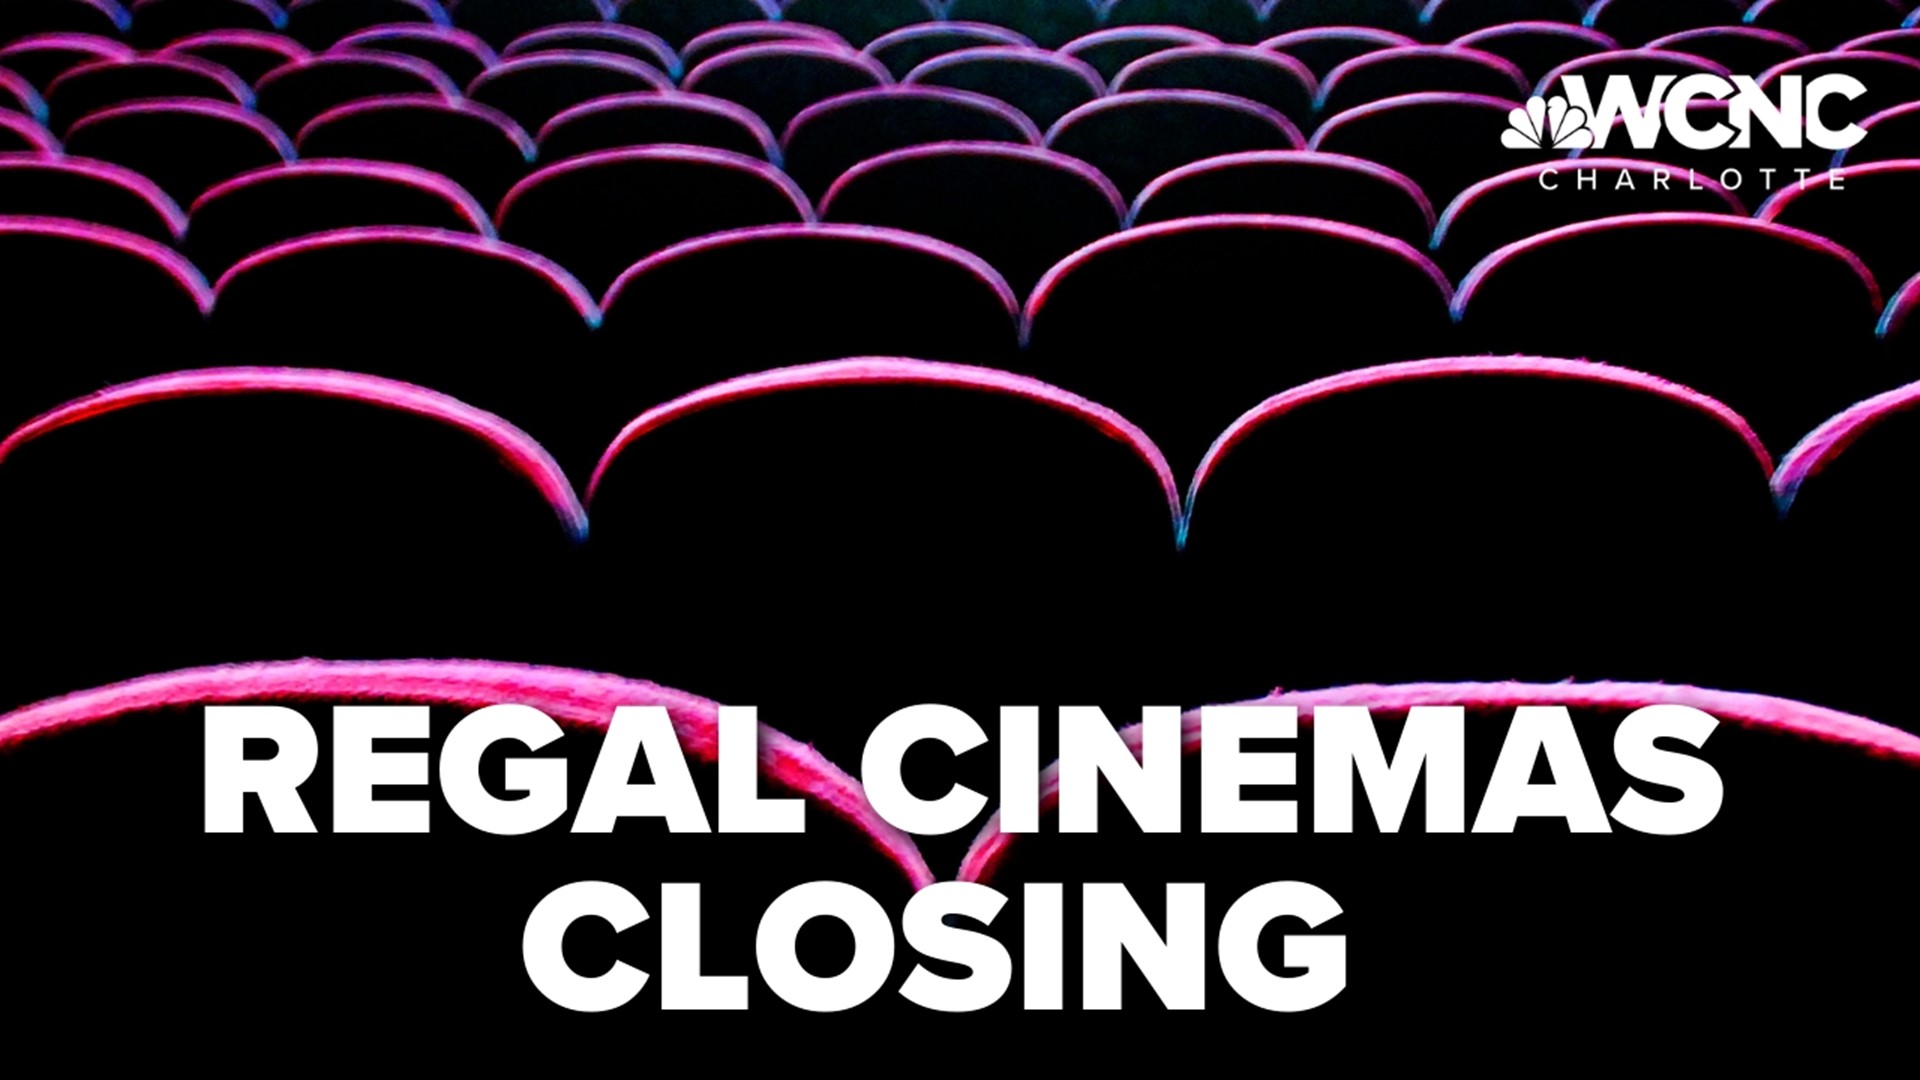 Regal cinemas announces it will be closing dozens of theaters across the country, including one in Apex, North Carolina.